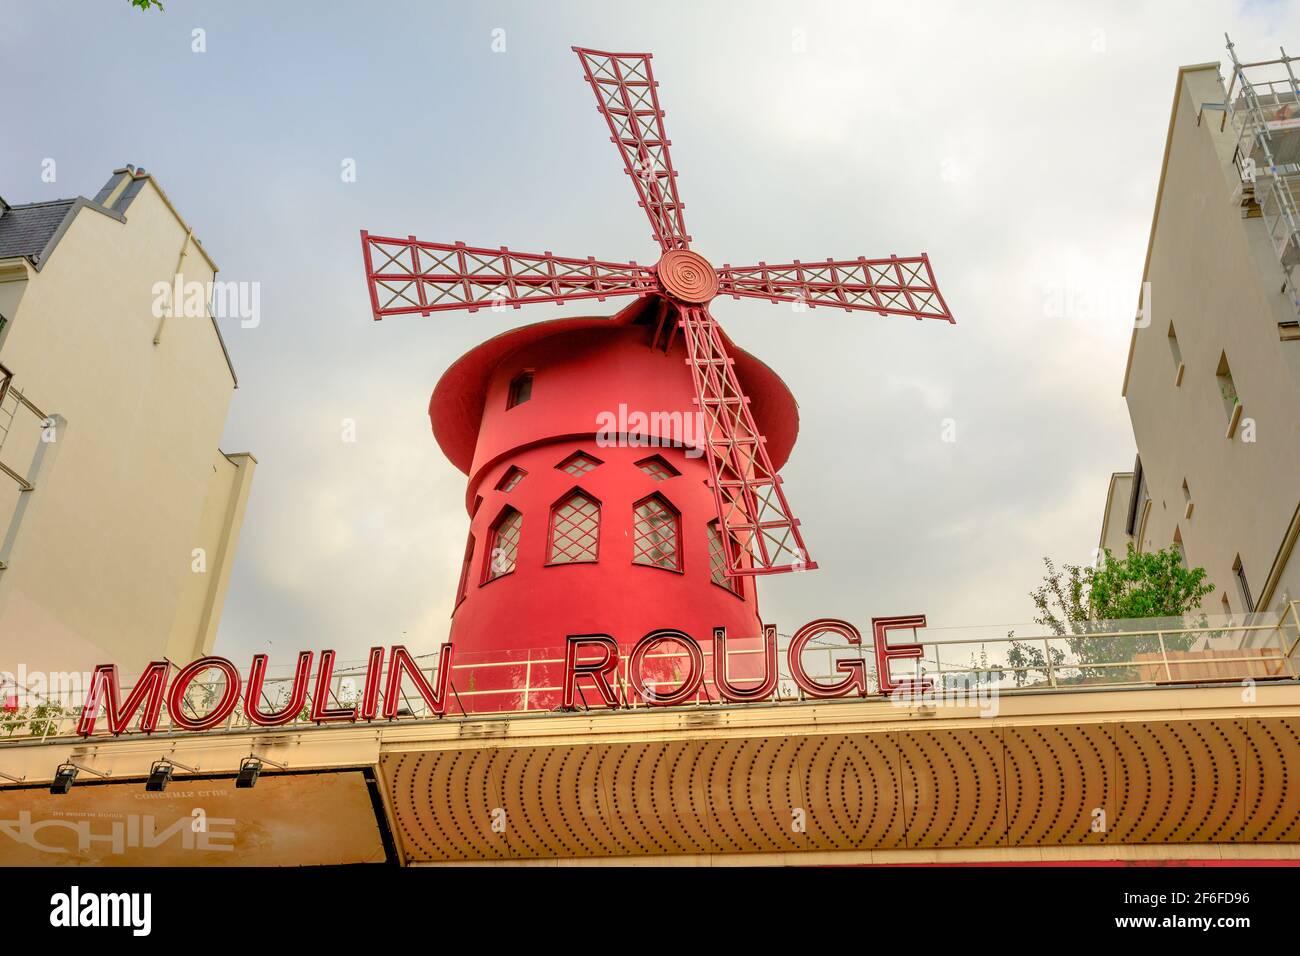 Moulin Rouge close up Stock Photo